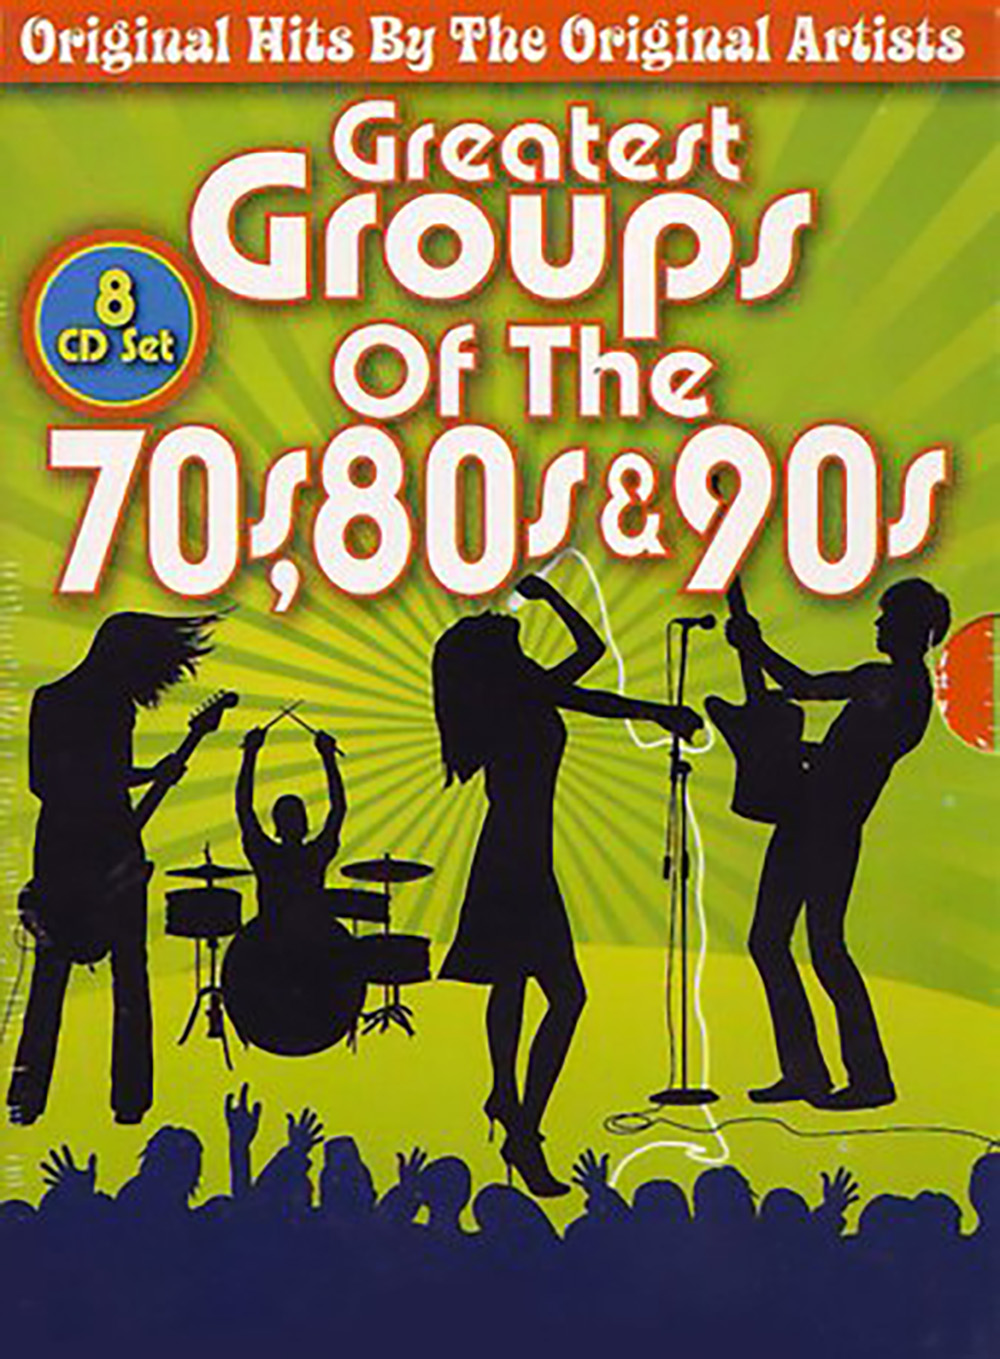 Greatest Groups Of The 70s, 80s, & 90s (8 CD)